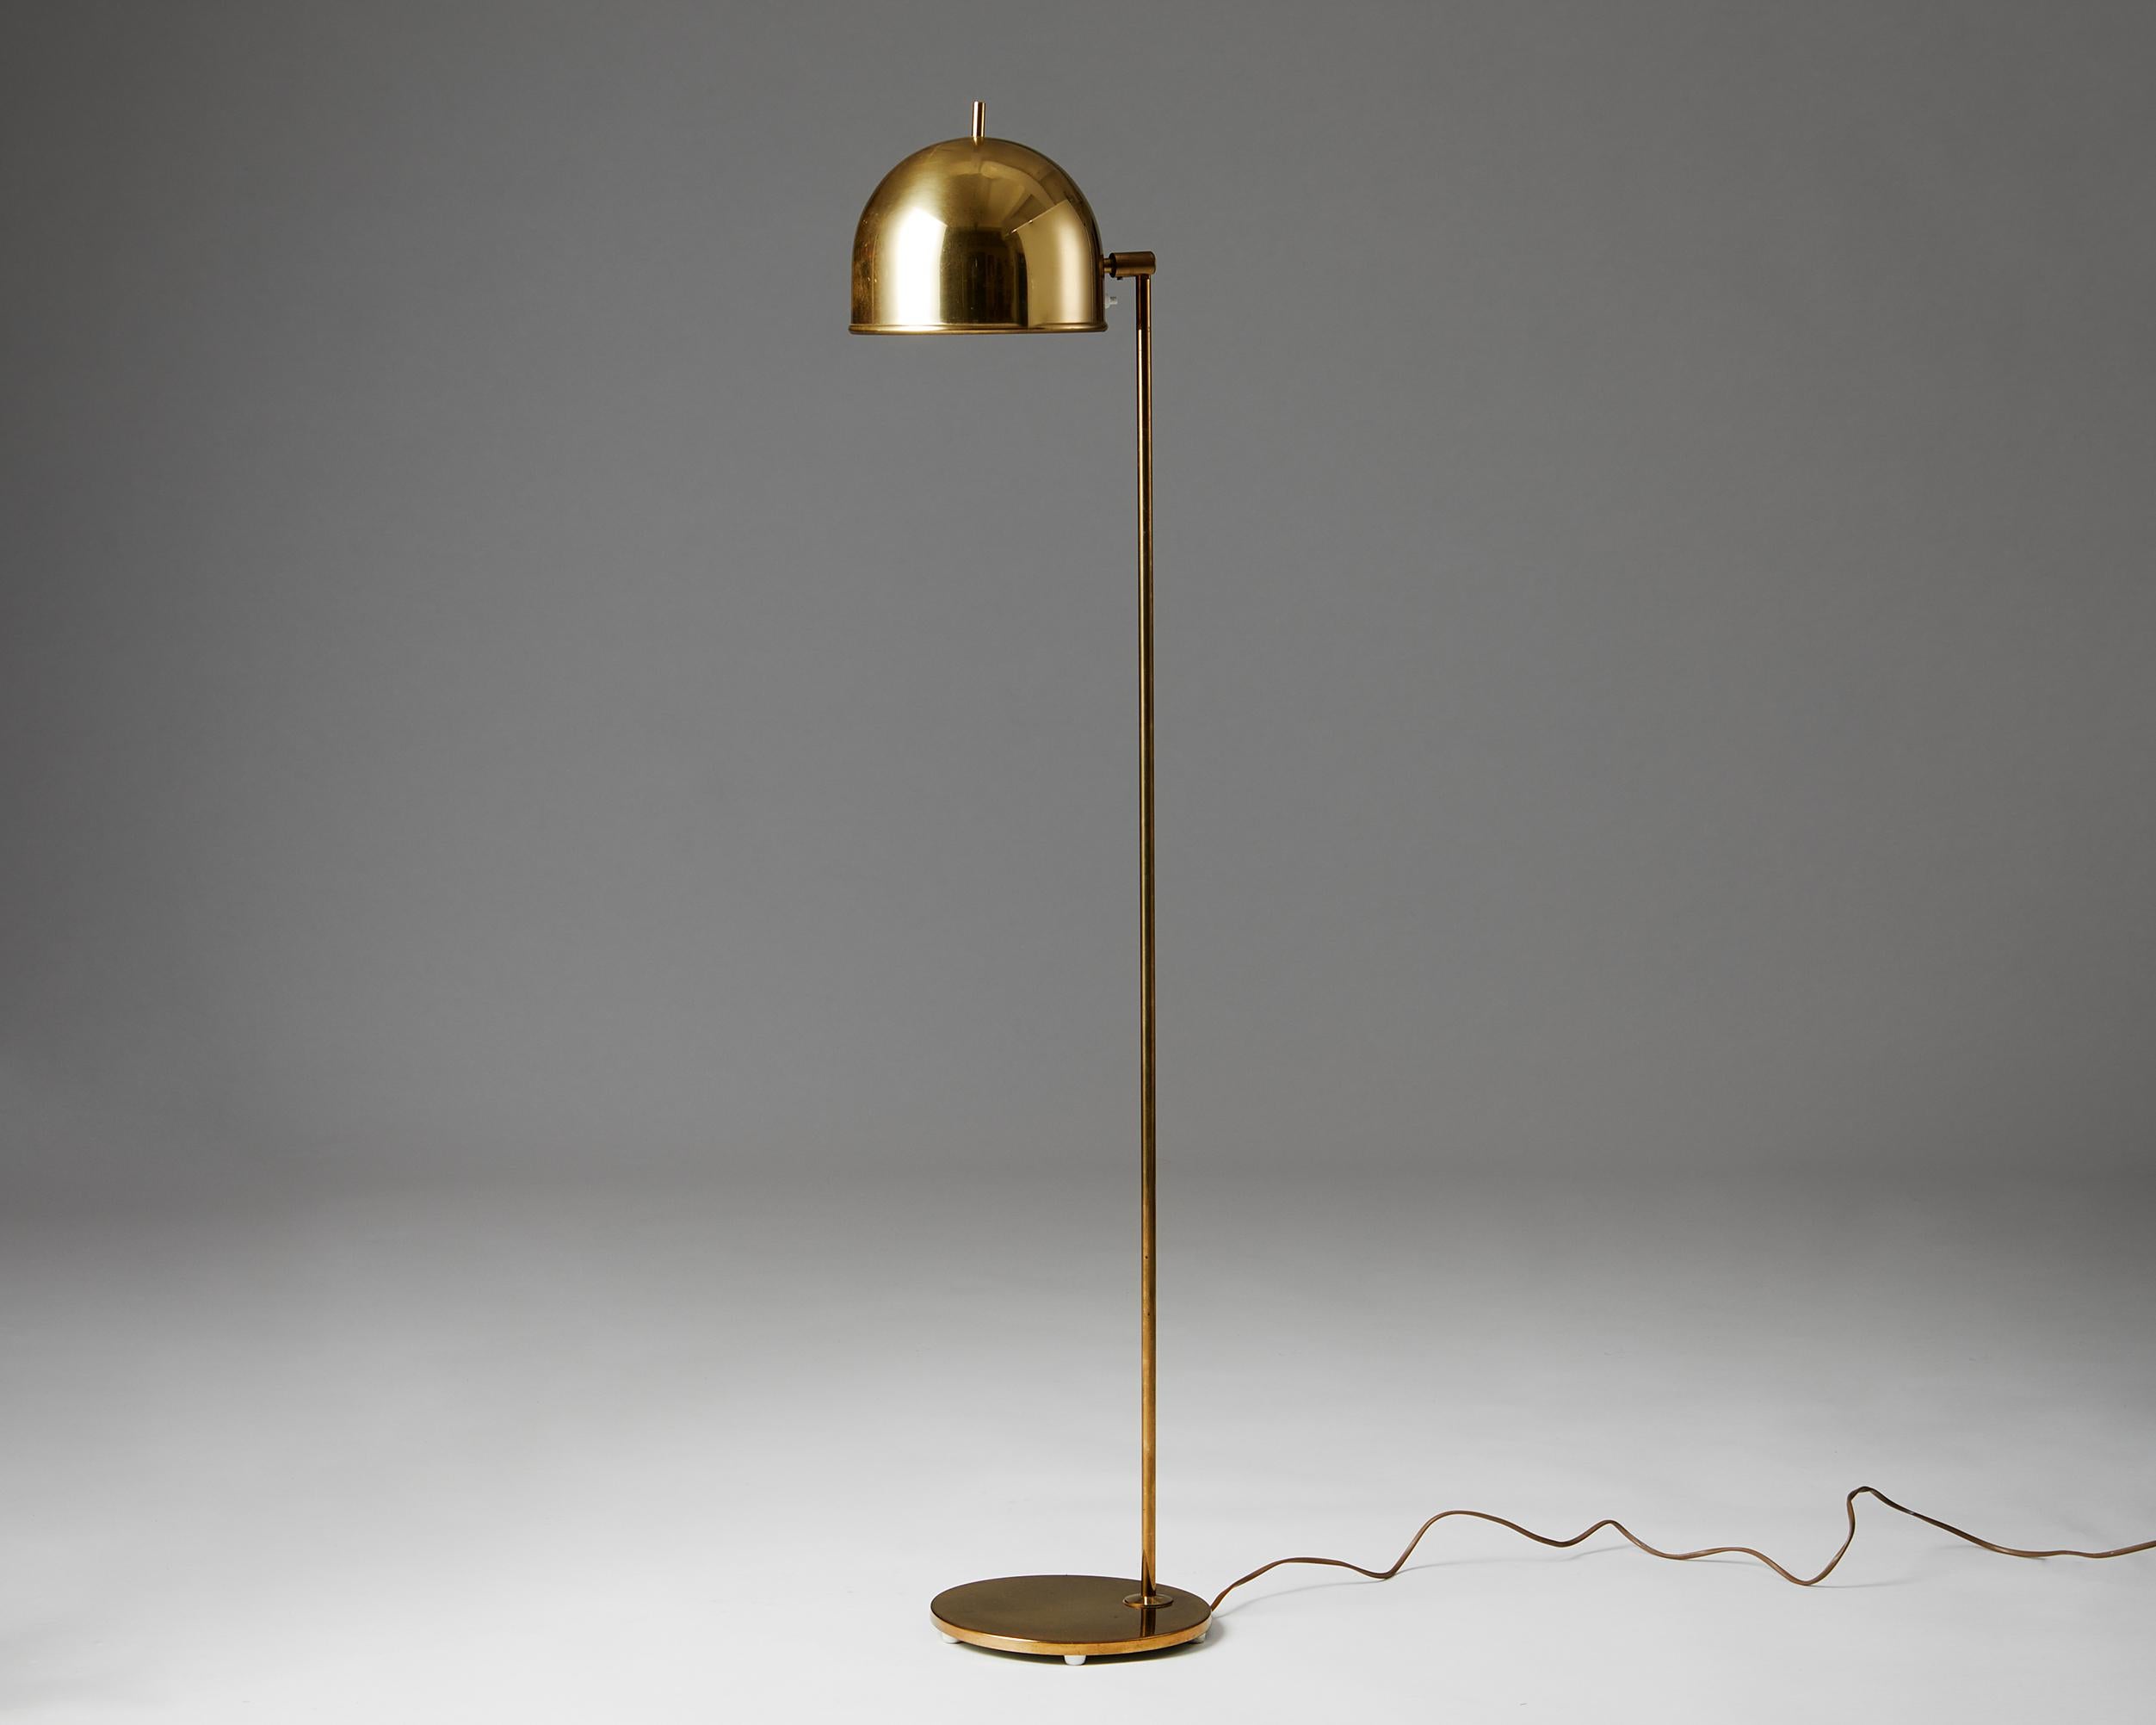 Floor lamp model G-075 designed by Eje Ahlgren for Bergboms,
Sweden. 1960s.
Brass.

Stamped.

This floor lamp, made with a fully adjustable shade, was manufactured in brass by Bergboms and designed by Eje Ahlgren. The protruding brass rod at